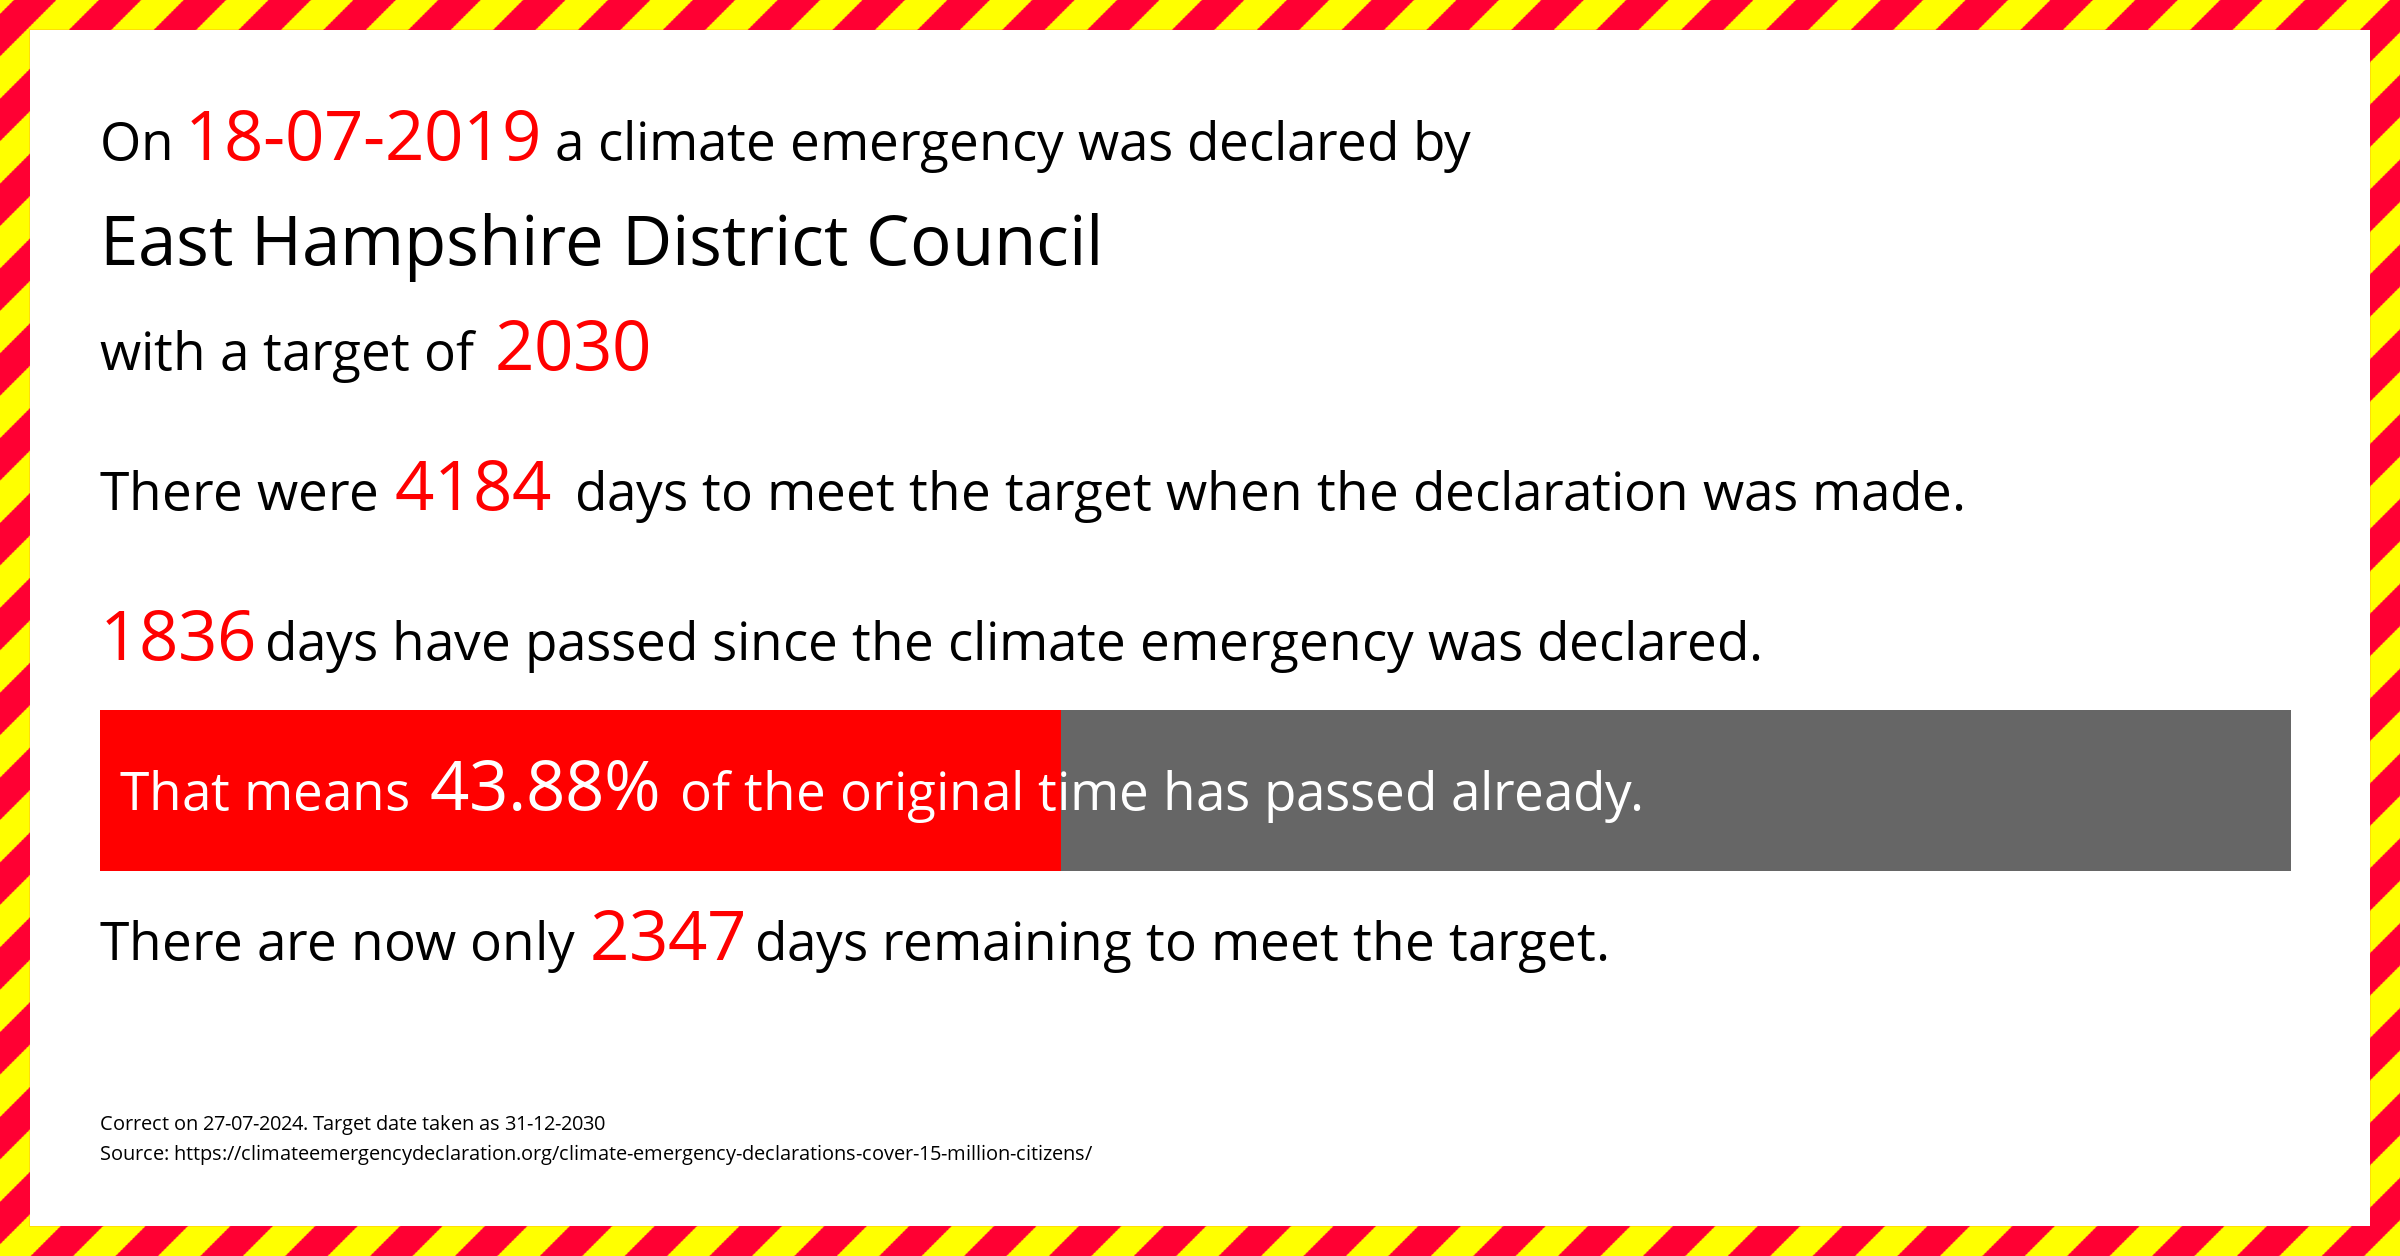 East Hampshire District Council declared a Climate emergency on Thursday 18th July 2019, with a target of 2030.